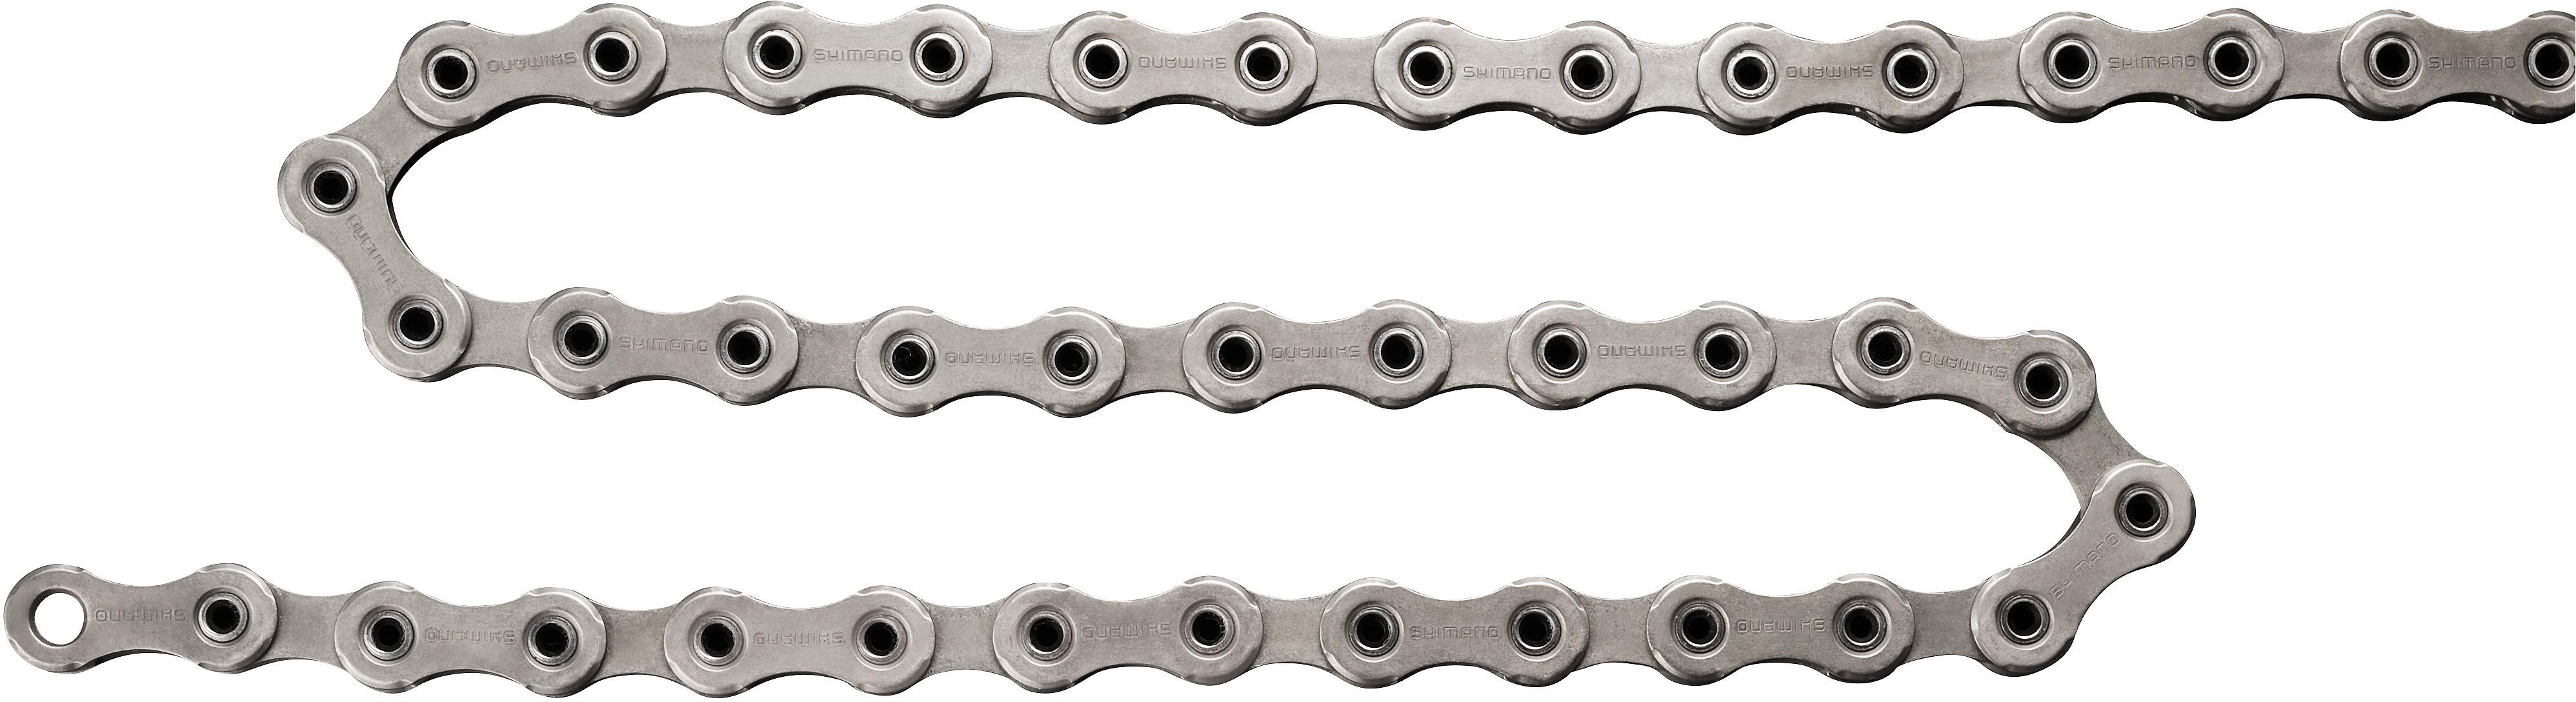 Shimano Hg701 Ultegra And Xt 11 Speed Chain - Silver